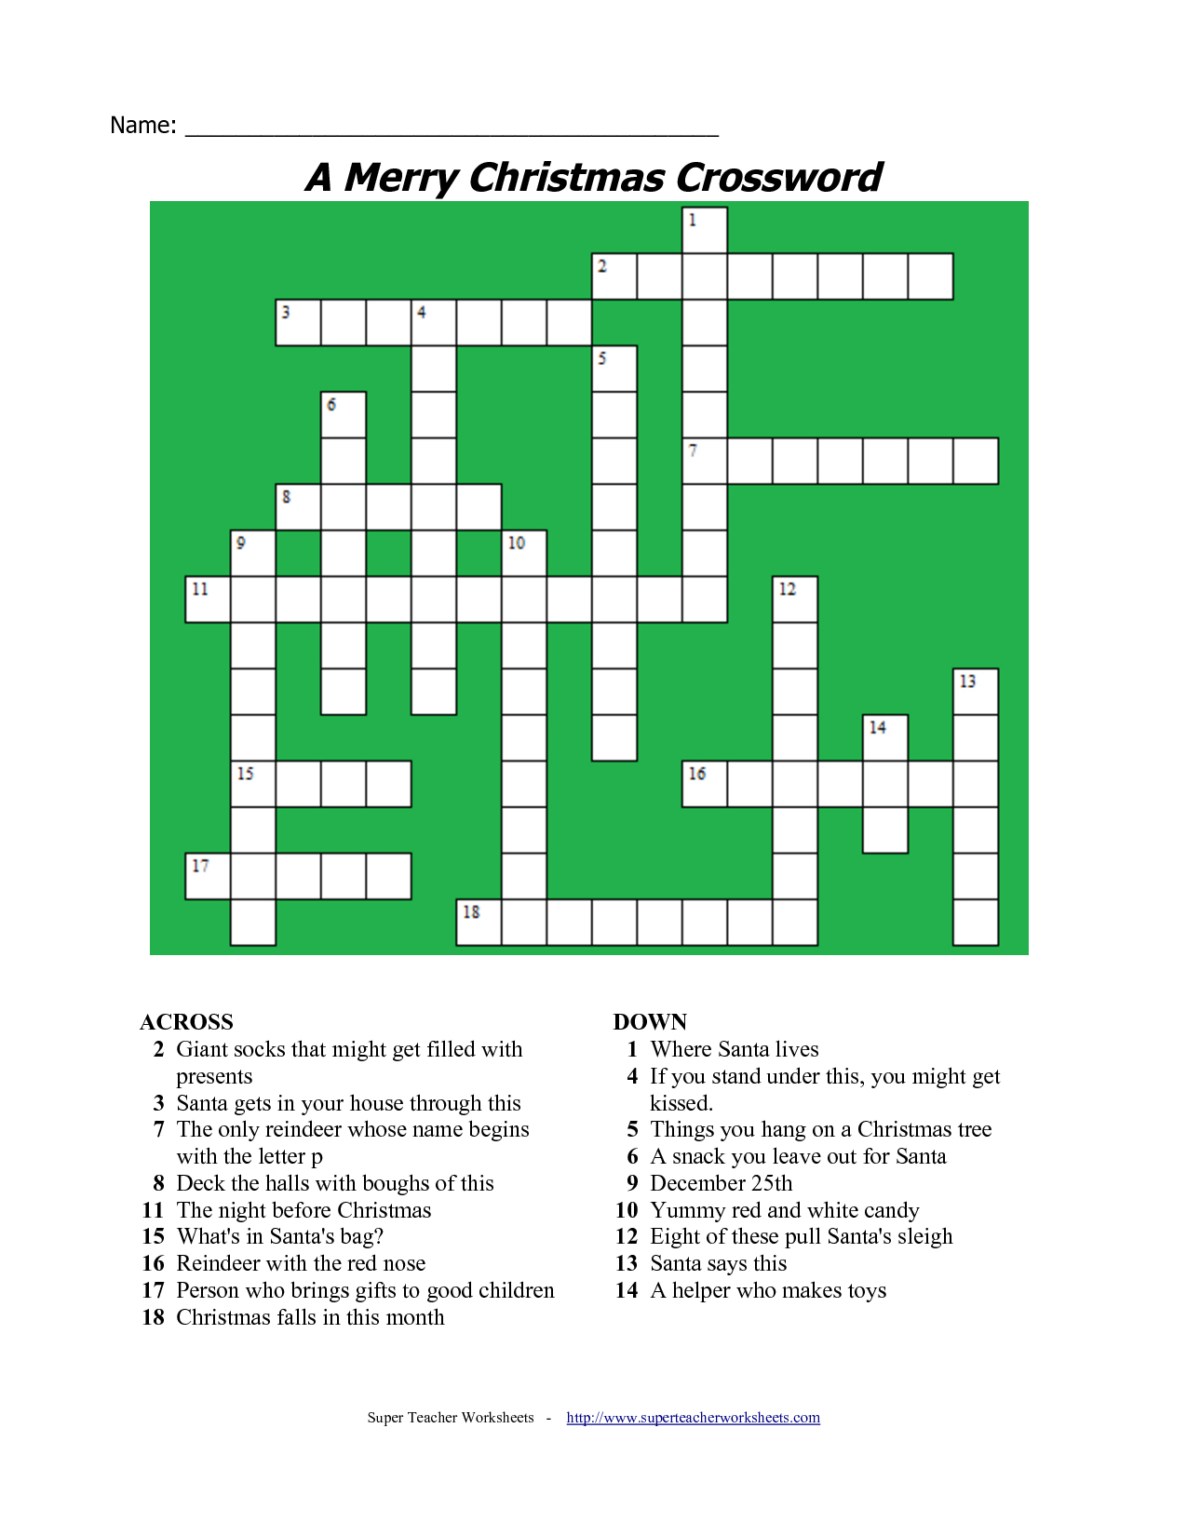 printable-christmas-crossword-puzzles-for-adults-with-answers-template-blowout